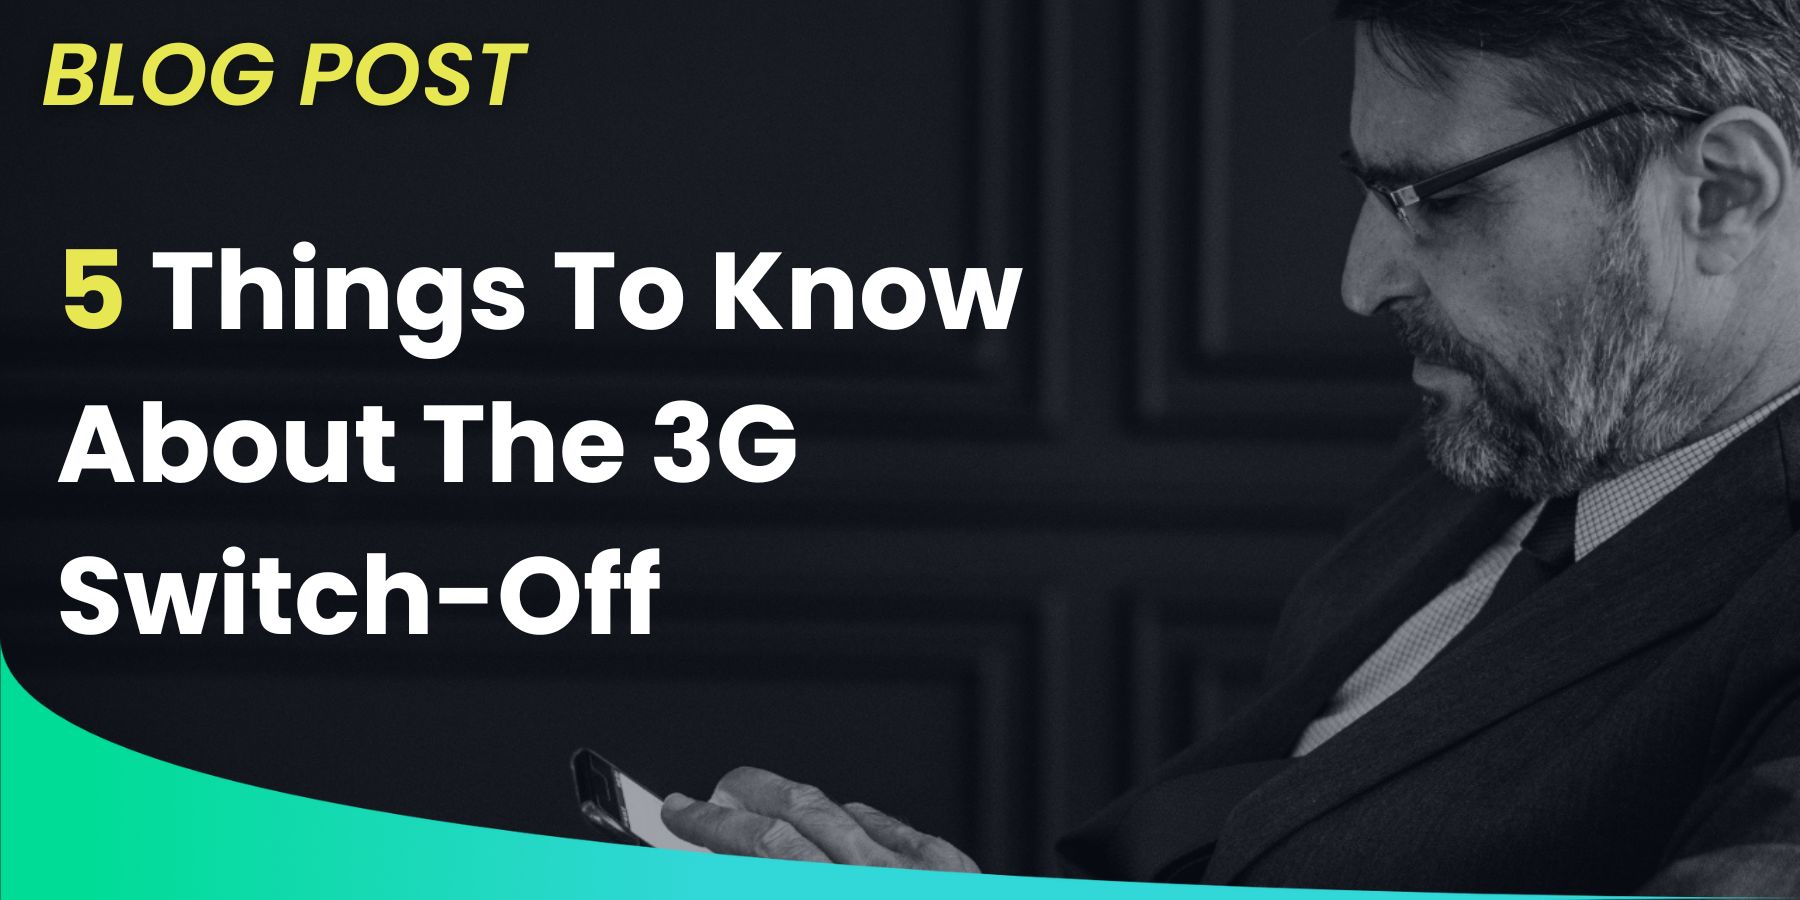 Featured image for “5 Things To Know About The 3G Switch-Off”